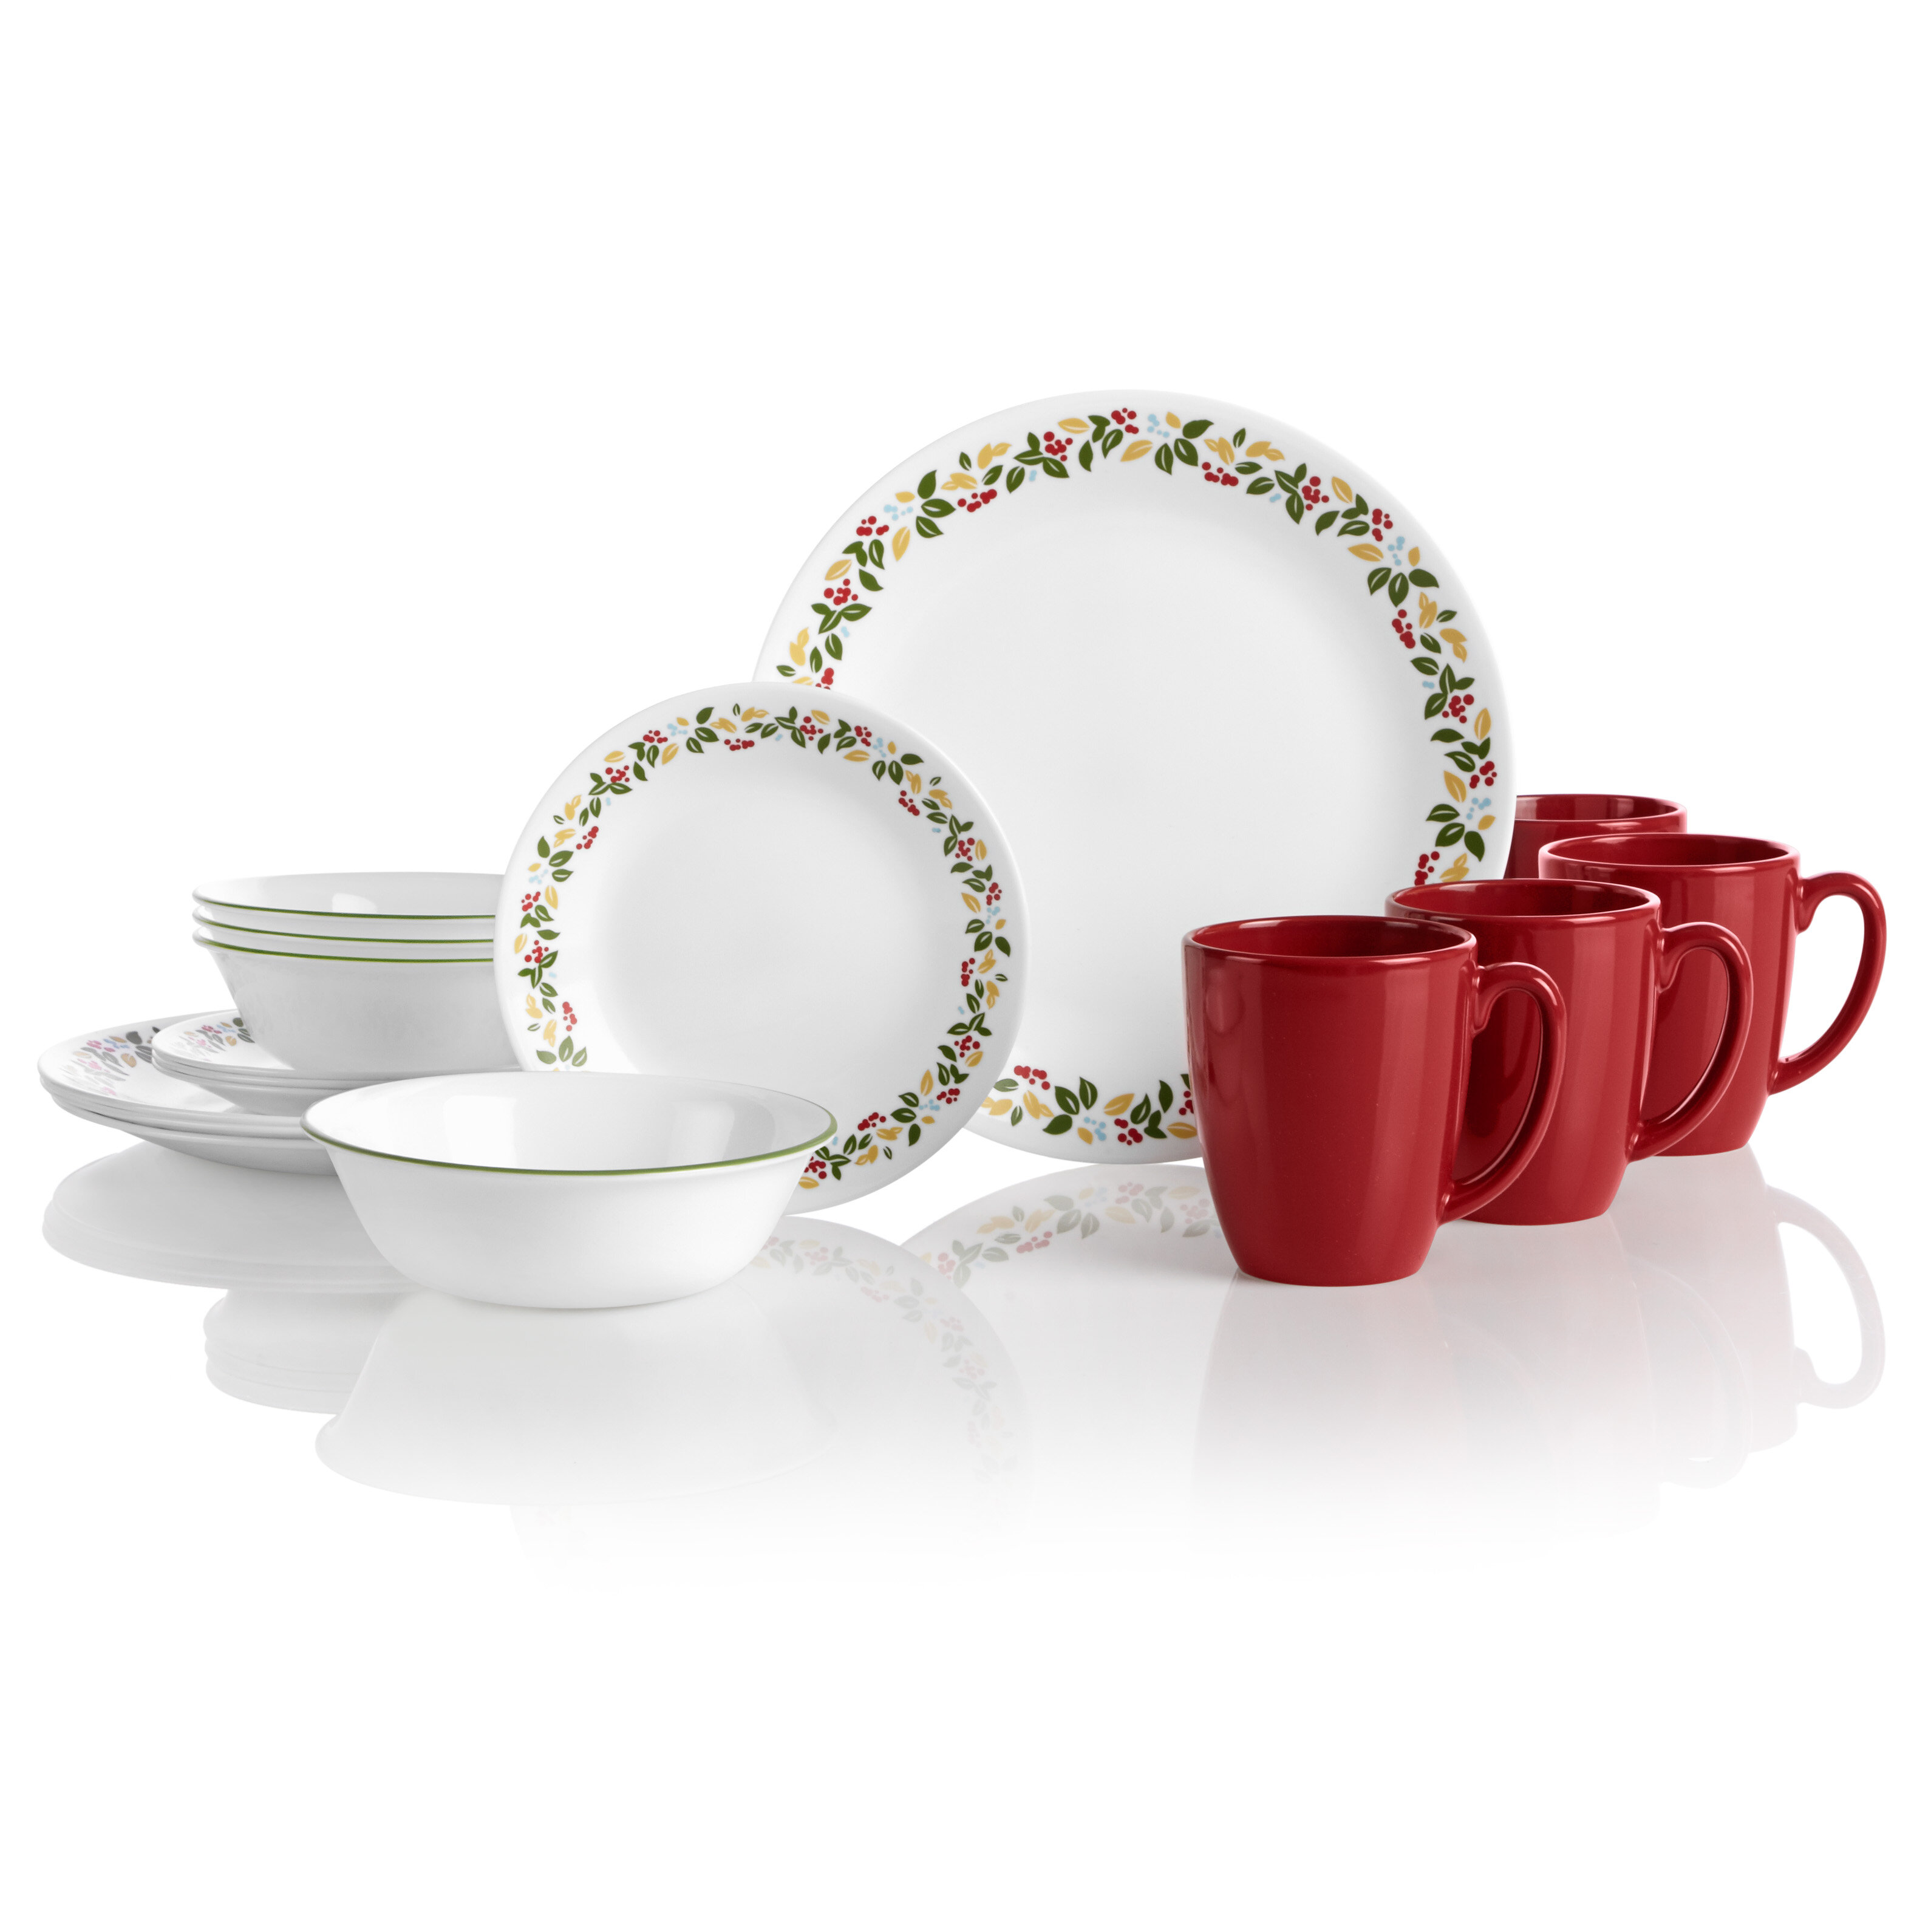 Corelle Holiday Berries 16 Piece Dinnerware Set Service For 4